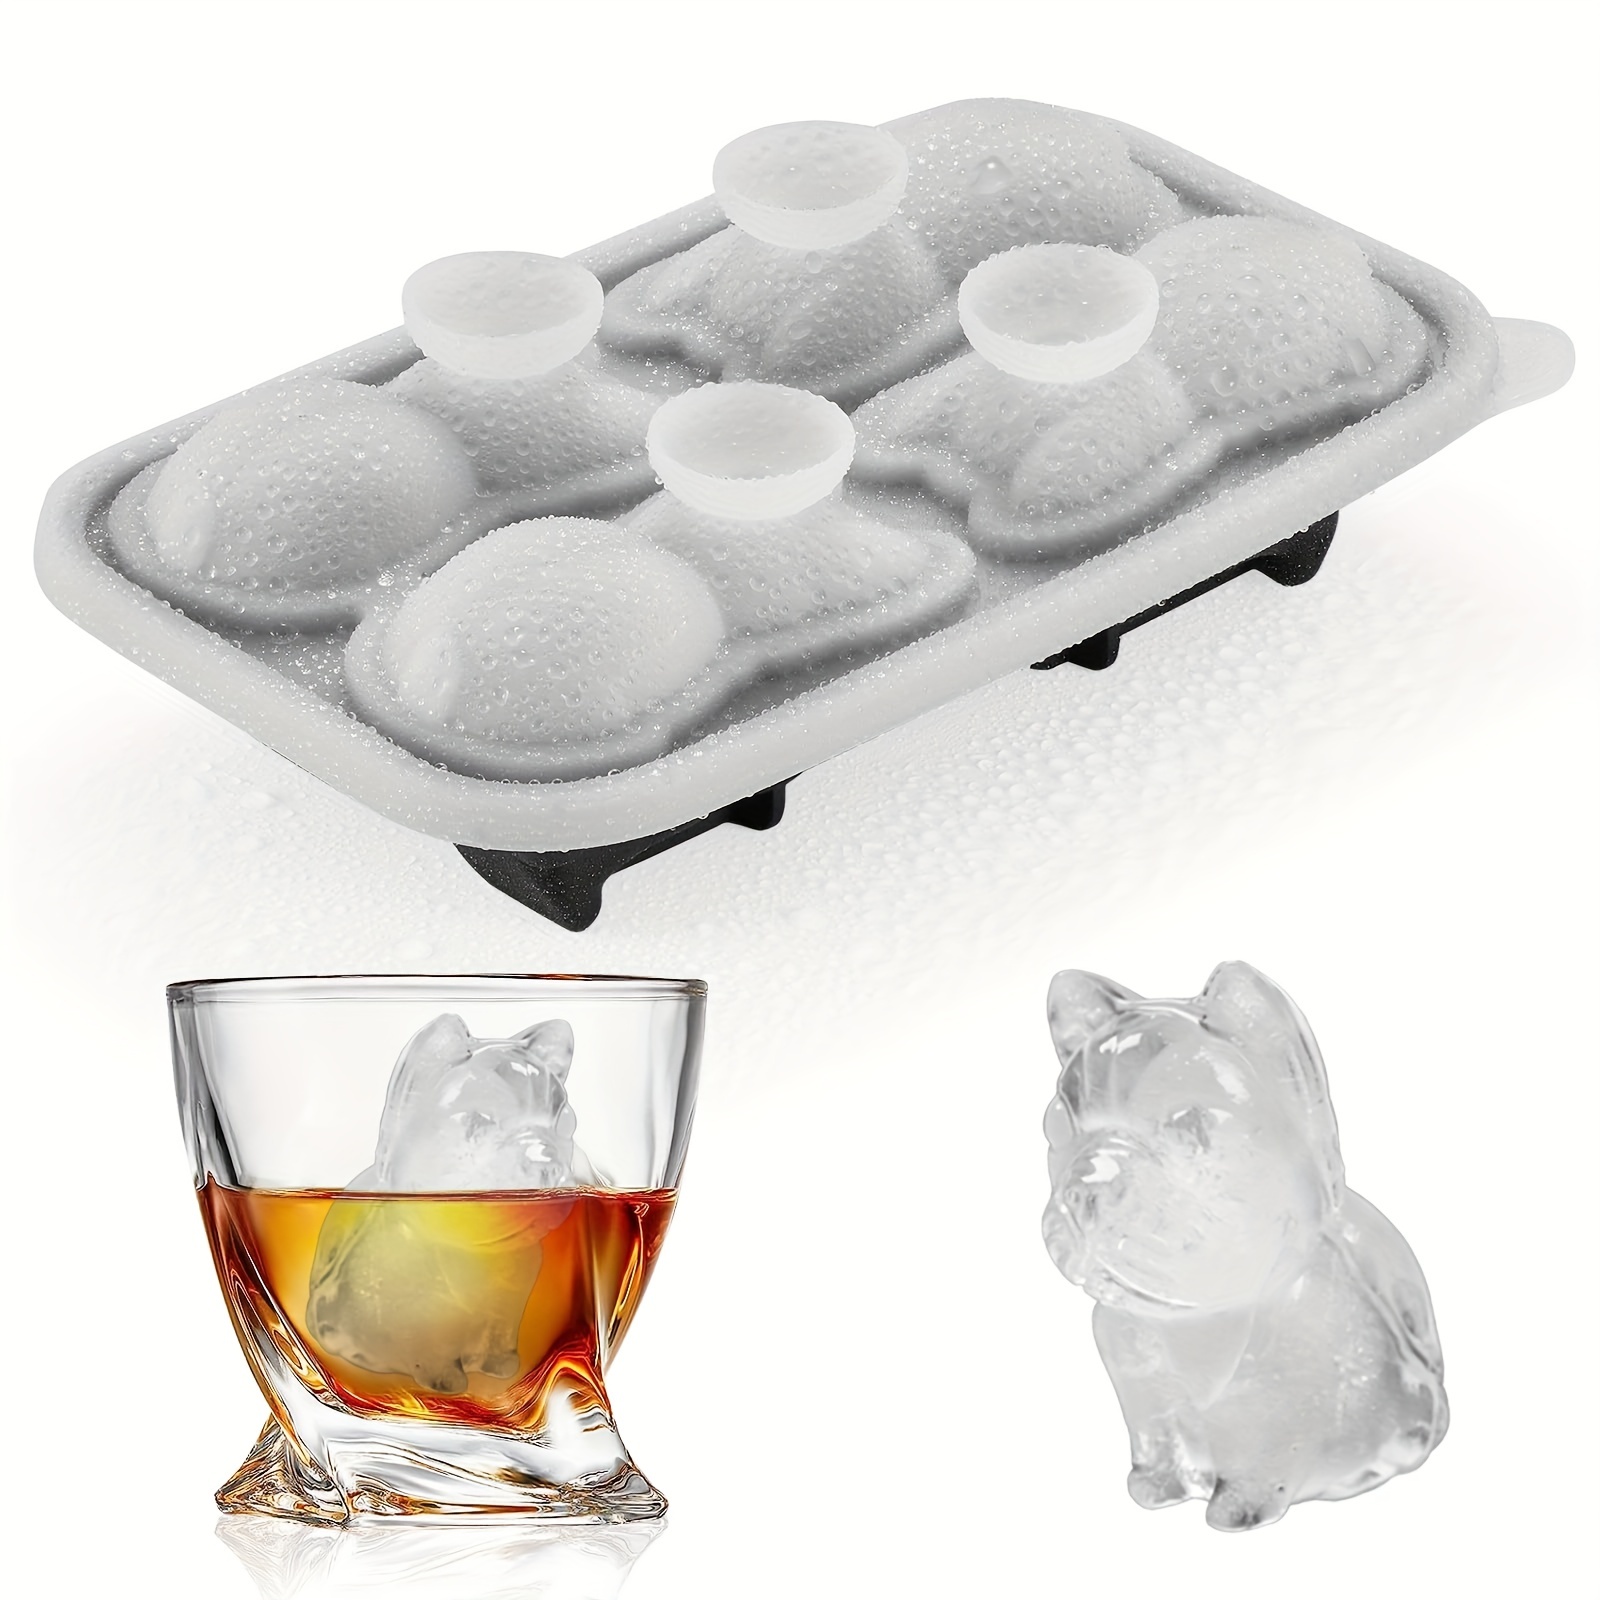 LYWUU Cat Shaped Silicone Ice Cube Molds and Tray Jelly Biscuits Chocolate Candy Making or Gelatin Setting